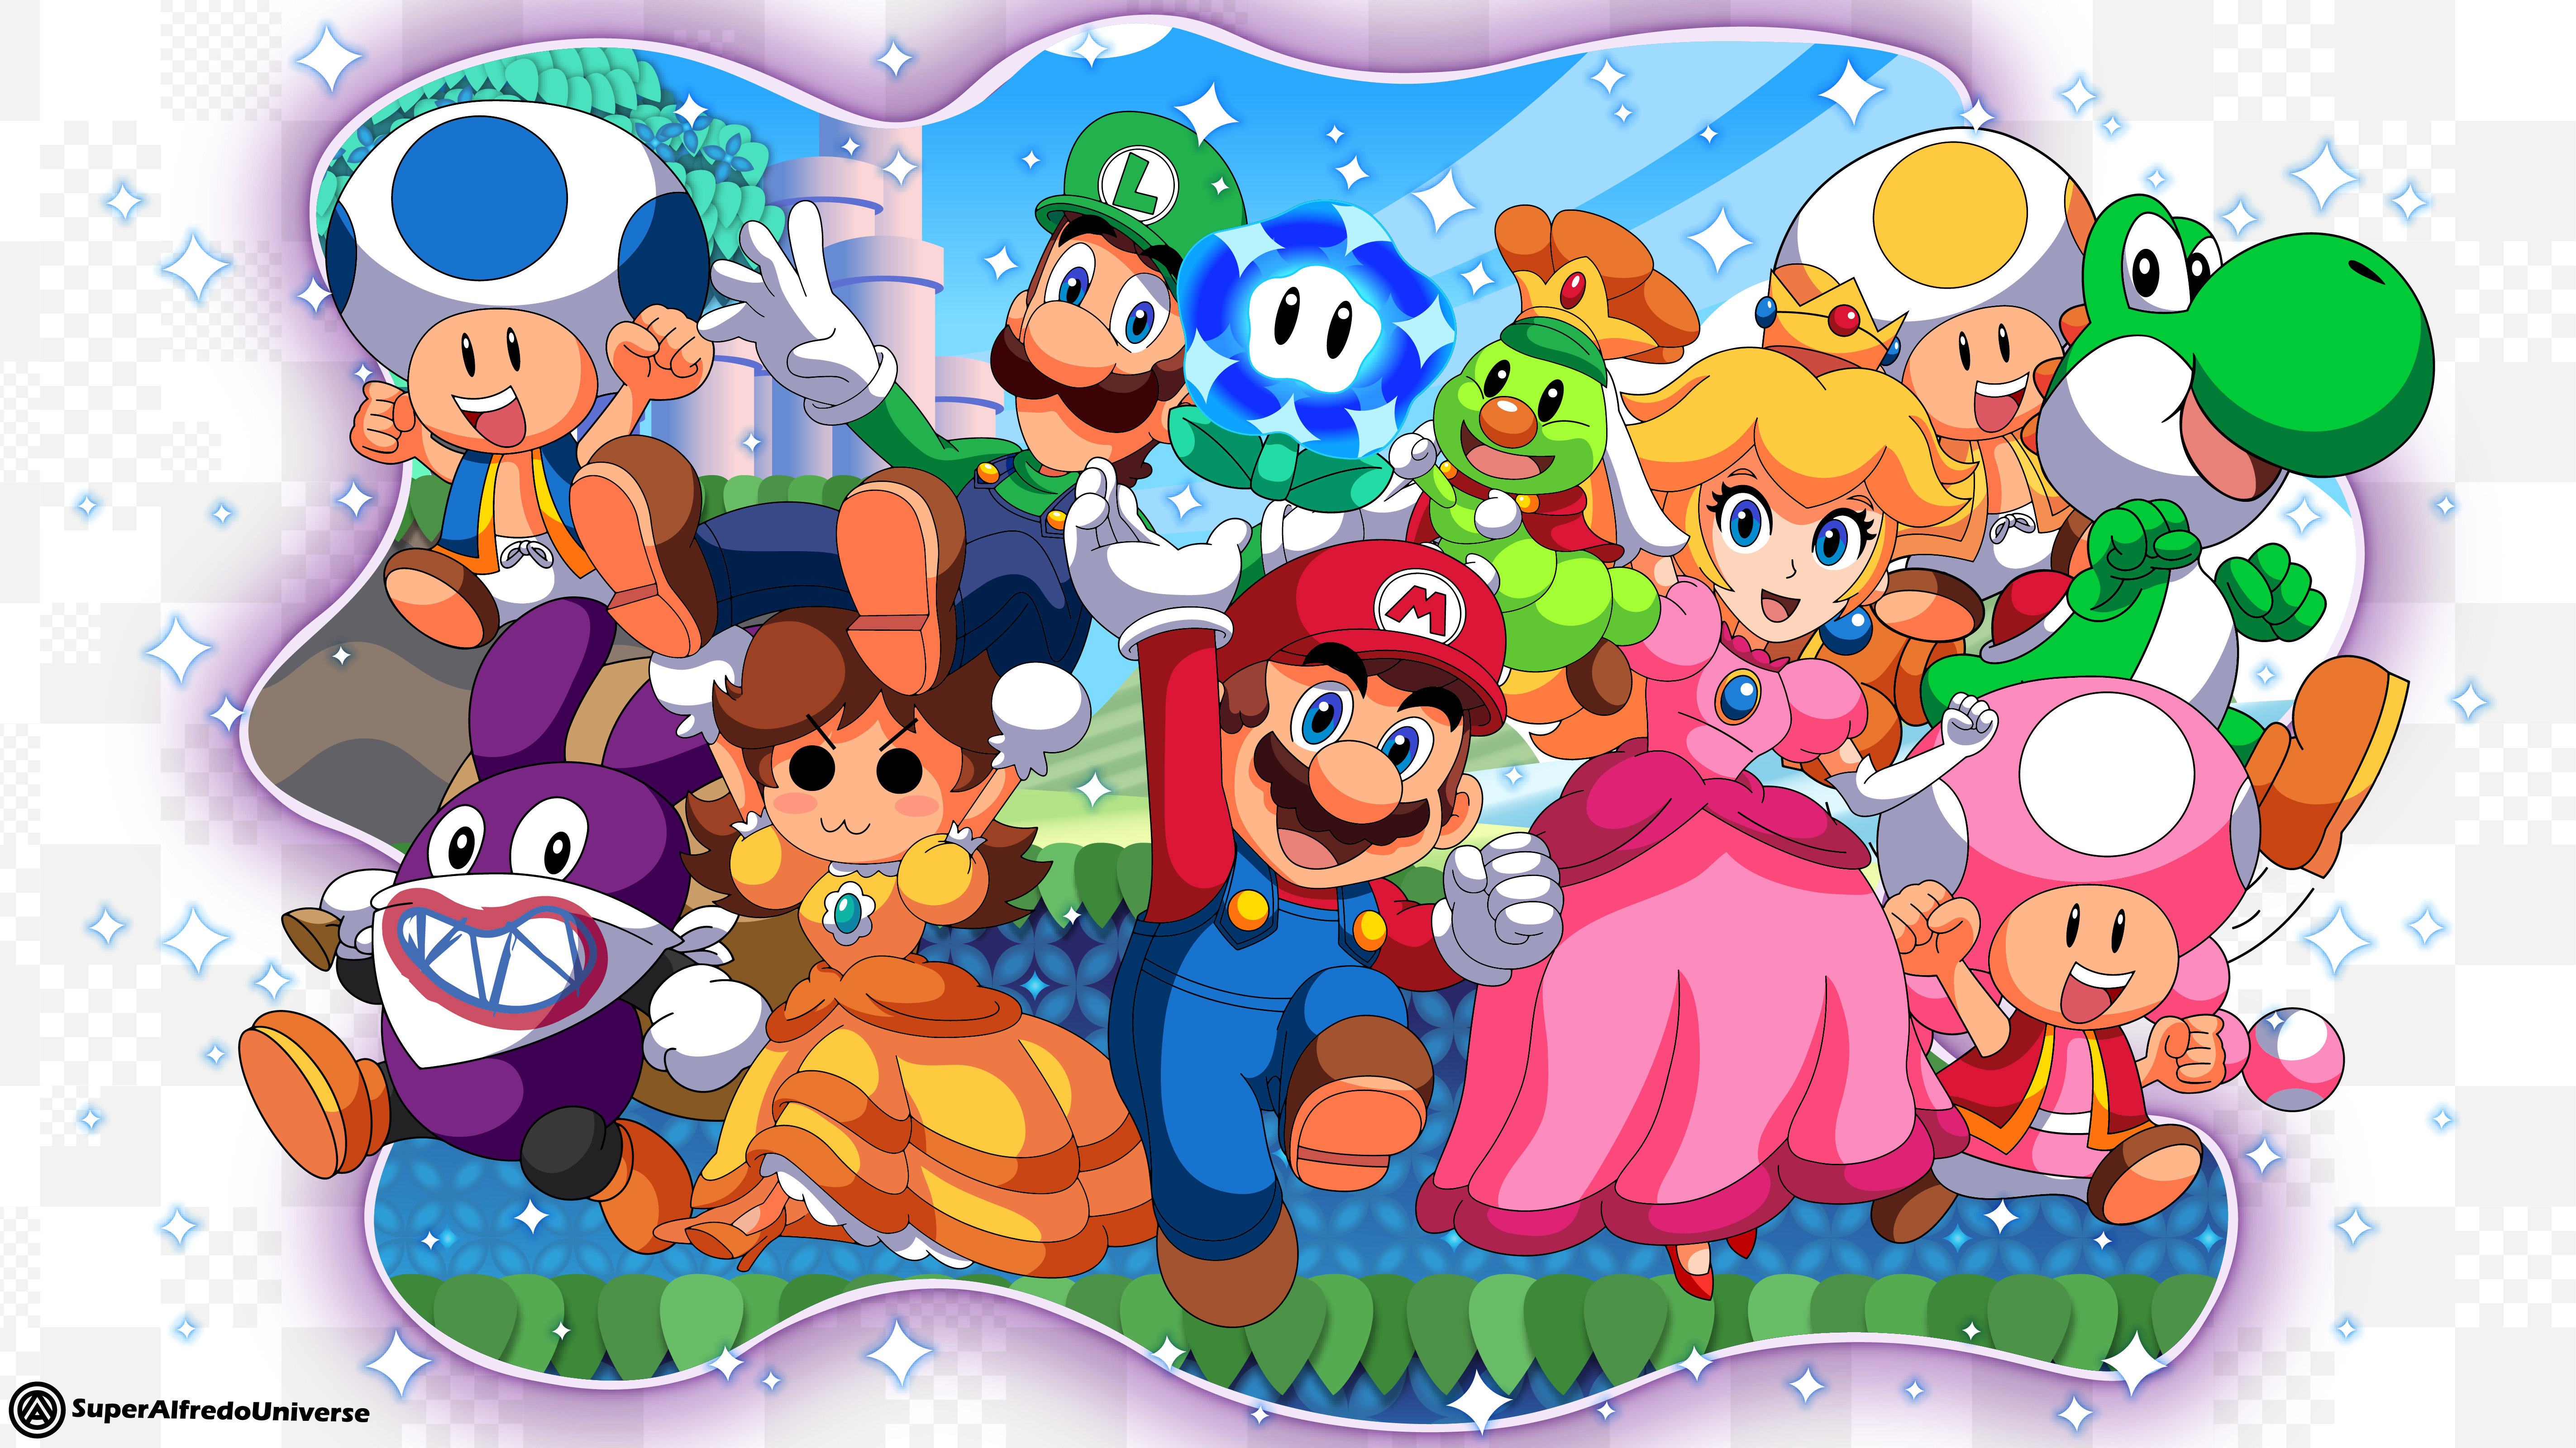 Super Mario Bros. Wonder Continues to Shutter Fan Favorite Characters